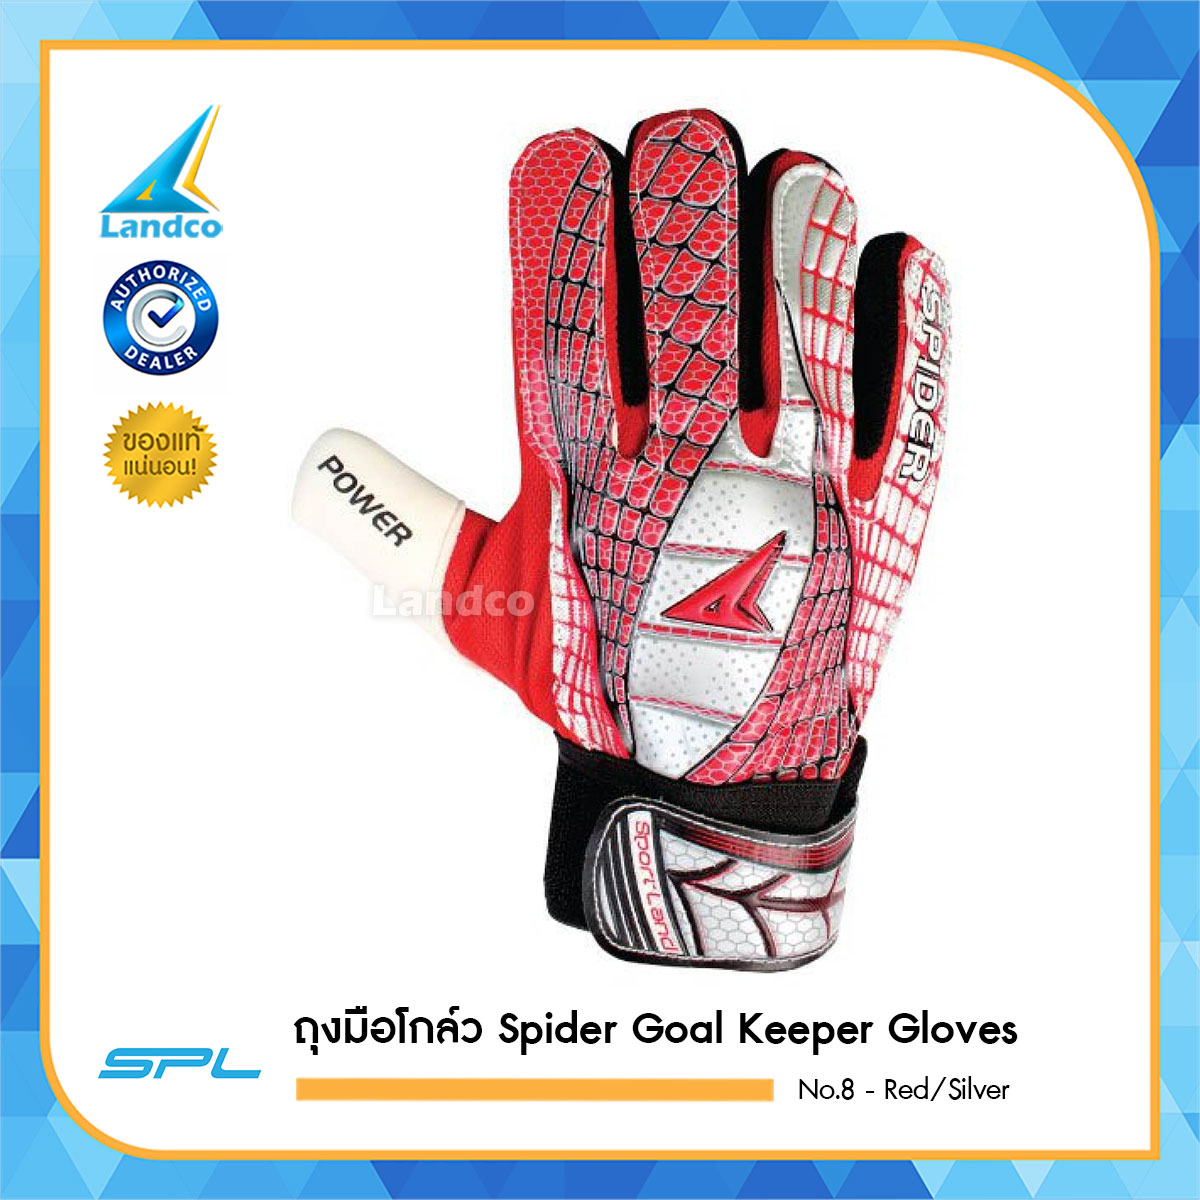 SPORTLAND Spider Goal Keeper Gloves No.8 - Red/Silver